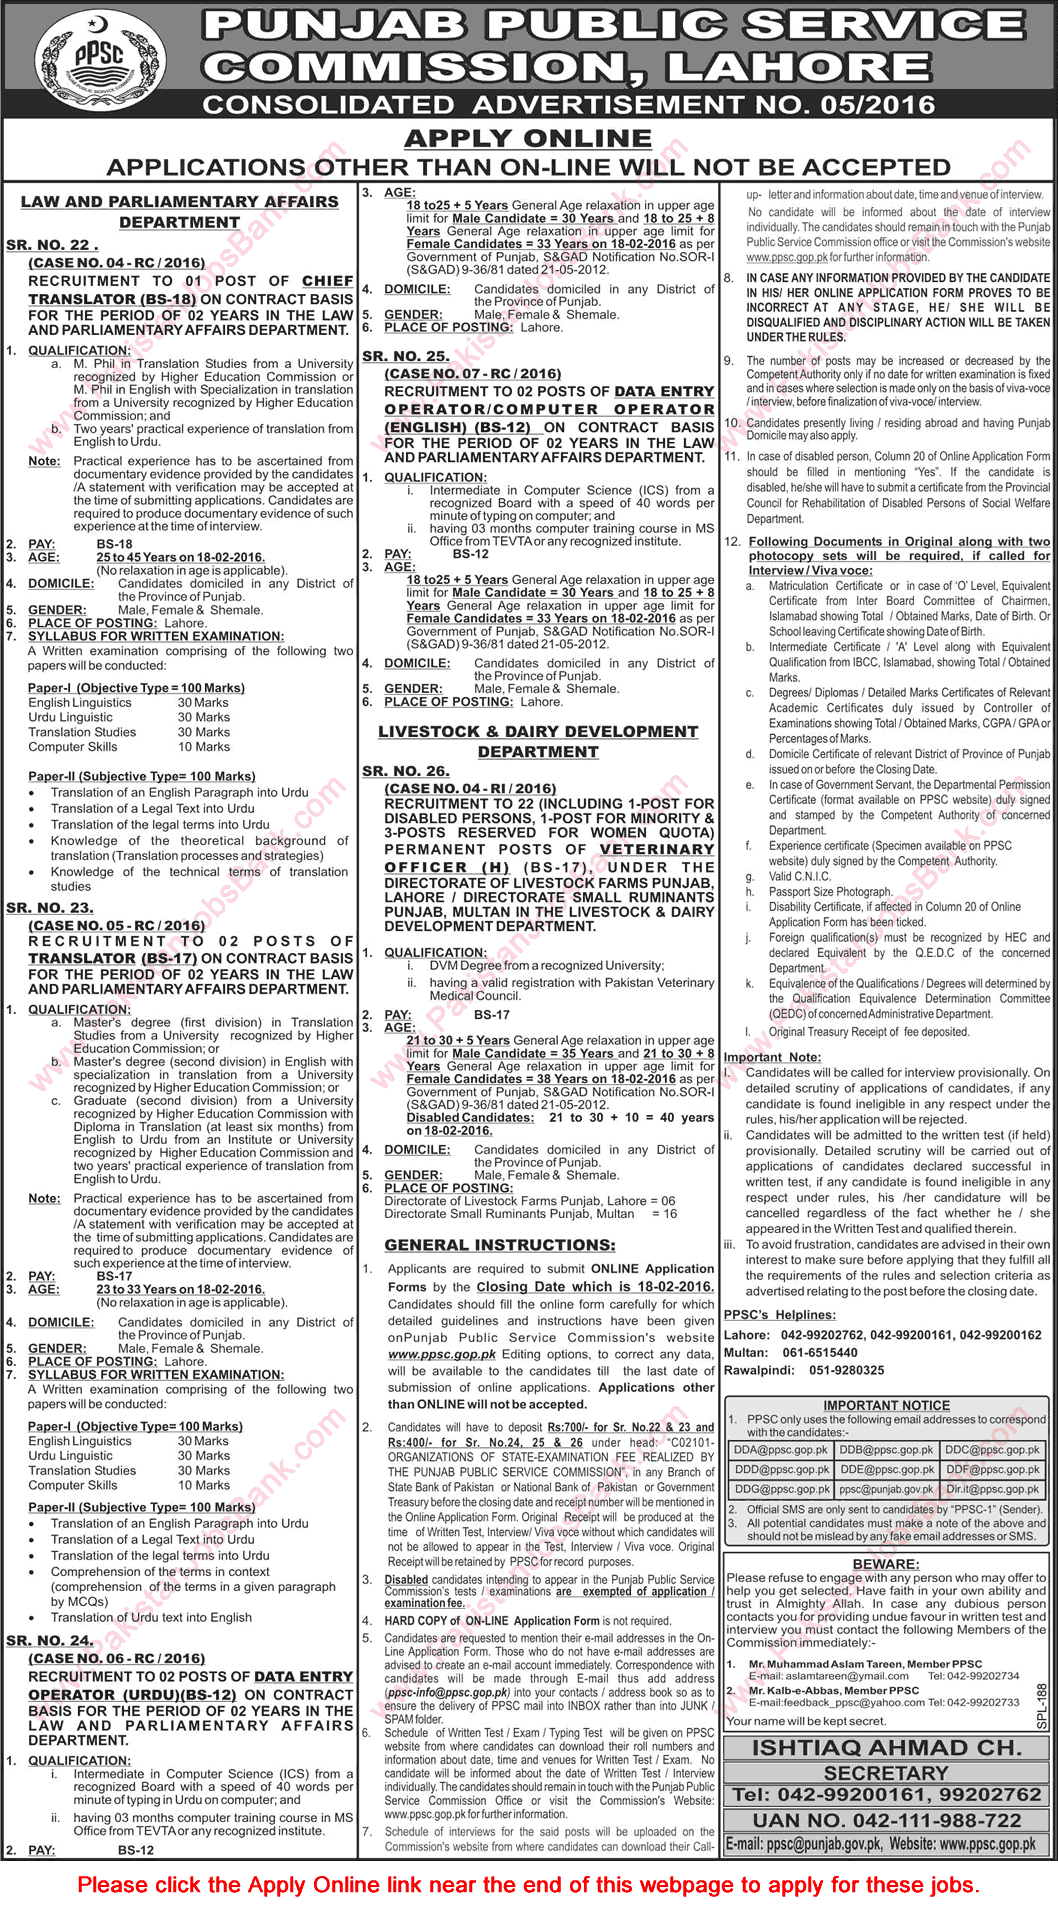 PPSC Jobs February 2016 Consolidated Advertisement No. 05/2016 5/2016 Apply Online Latest